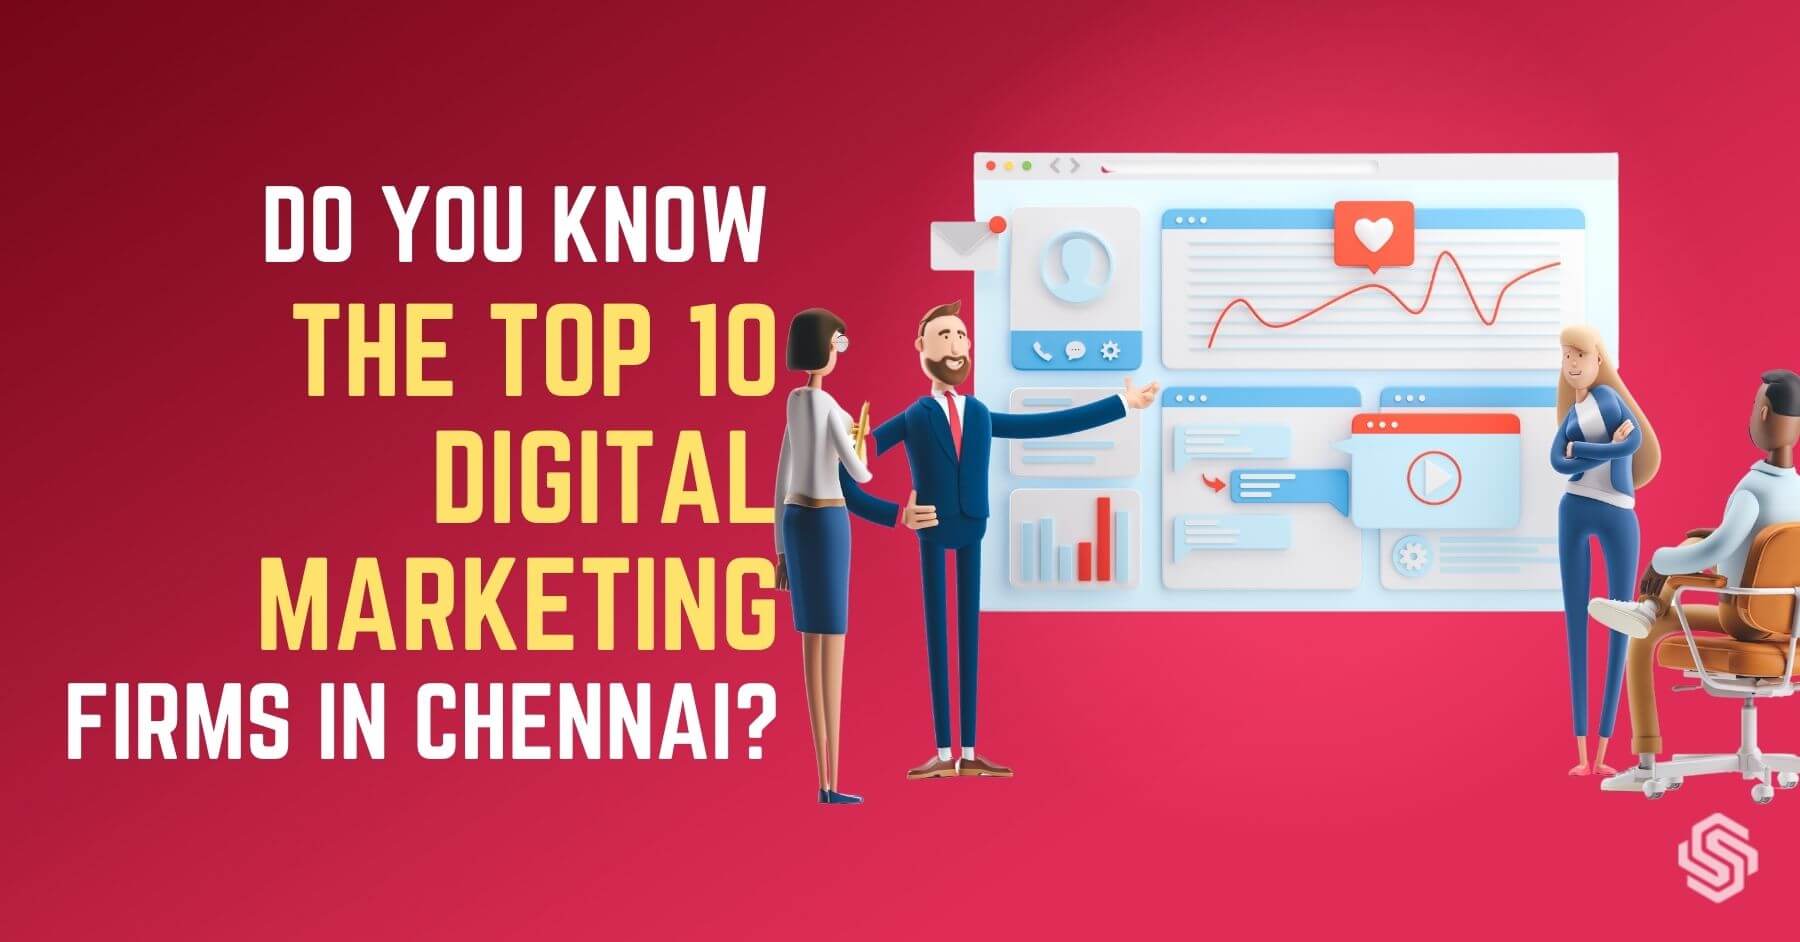 Do you know the Top 10 Digital marketing firms in Chennai?